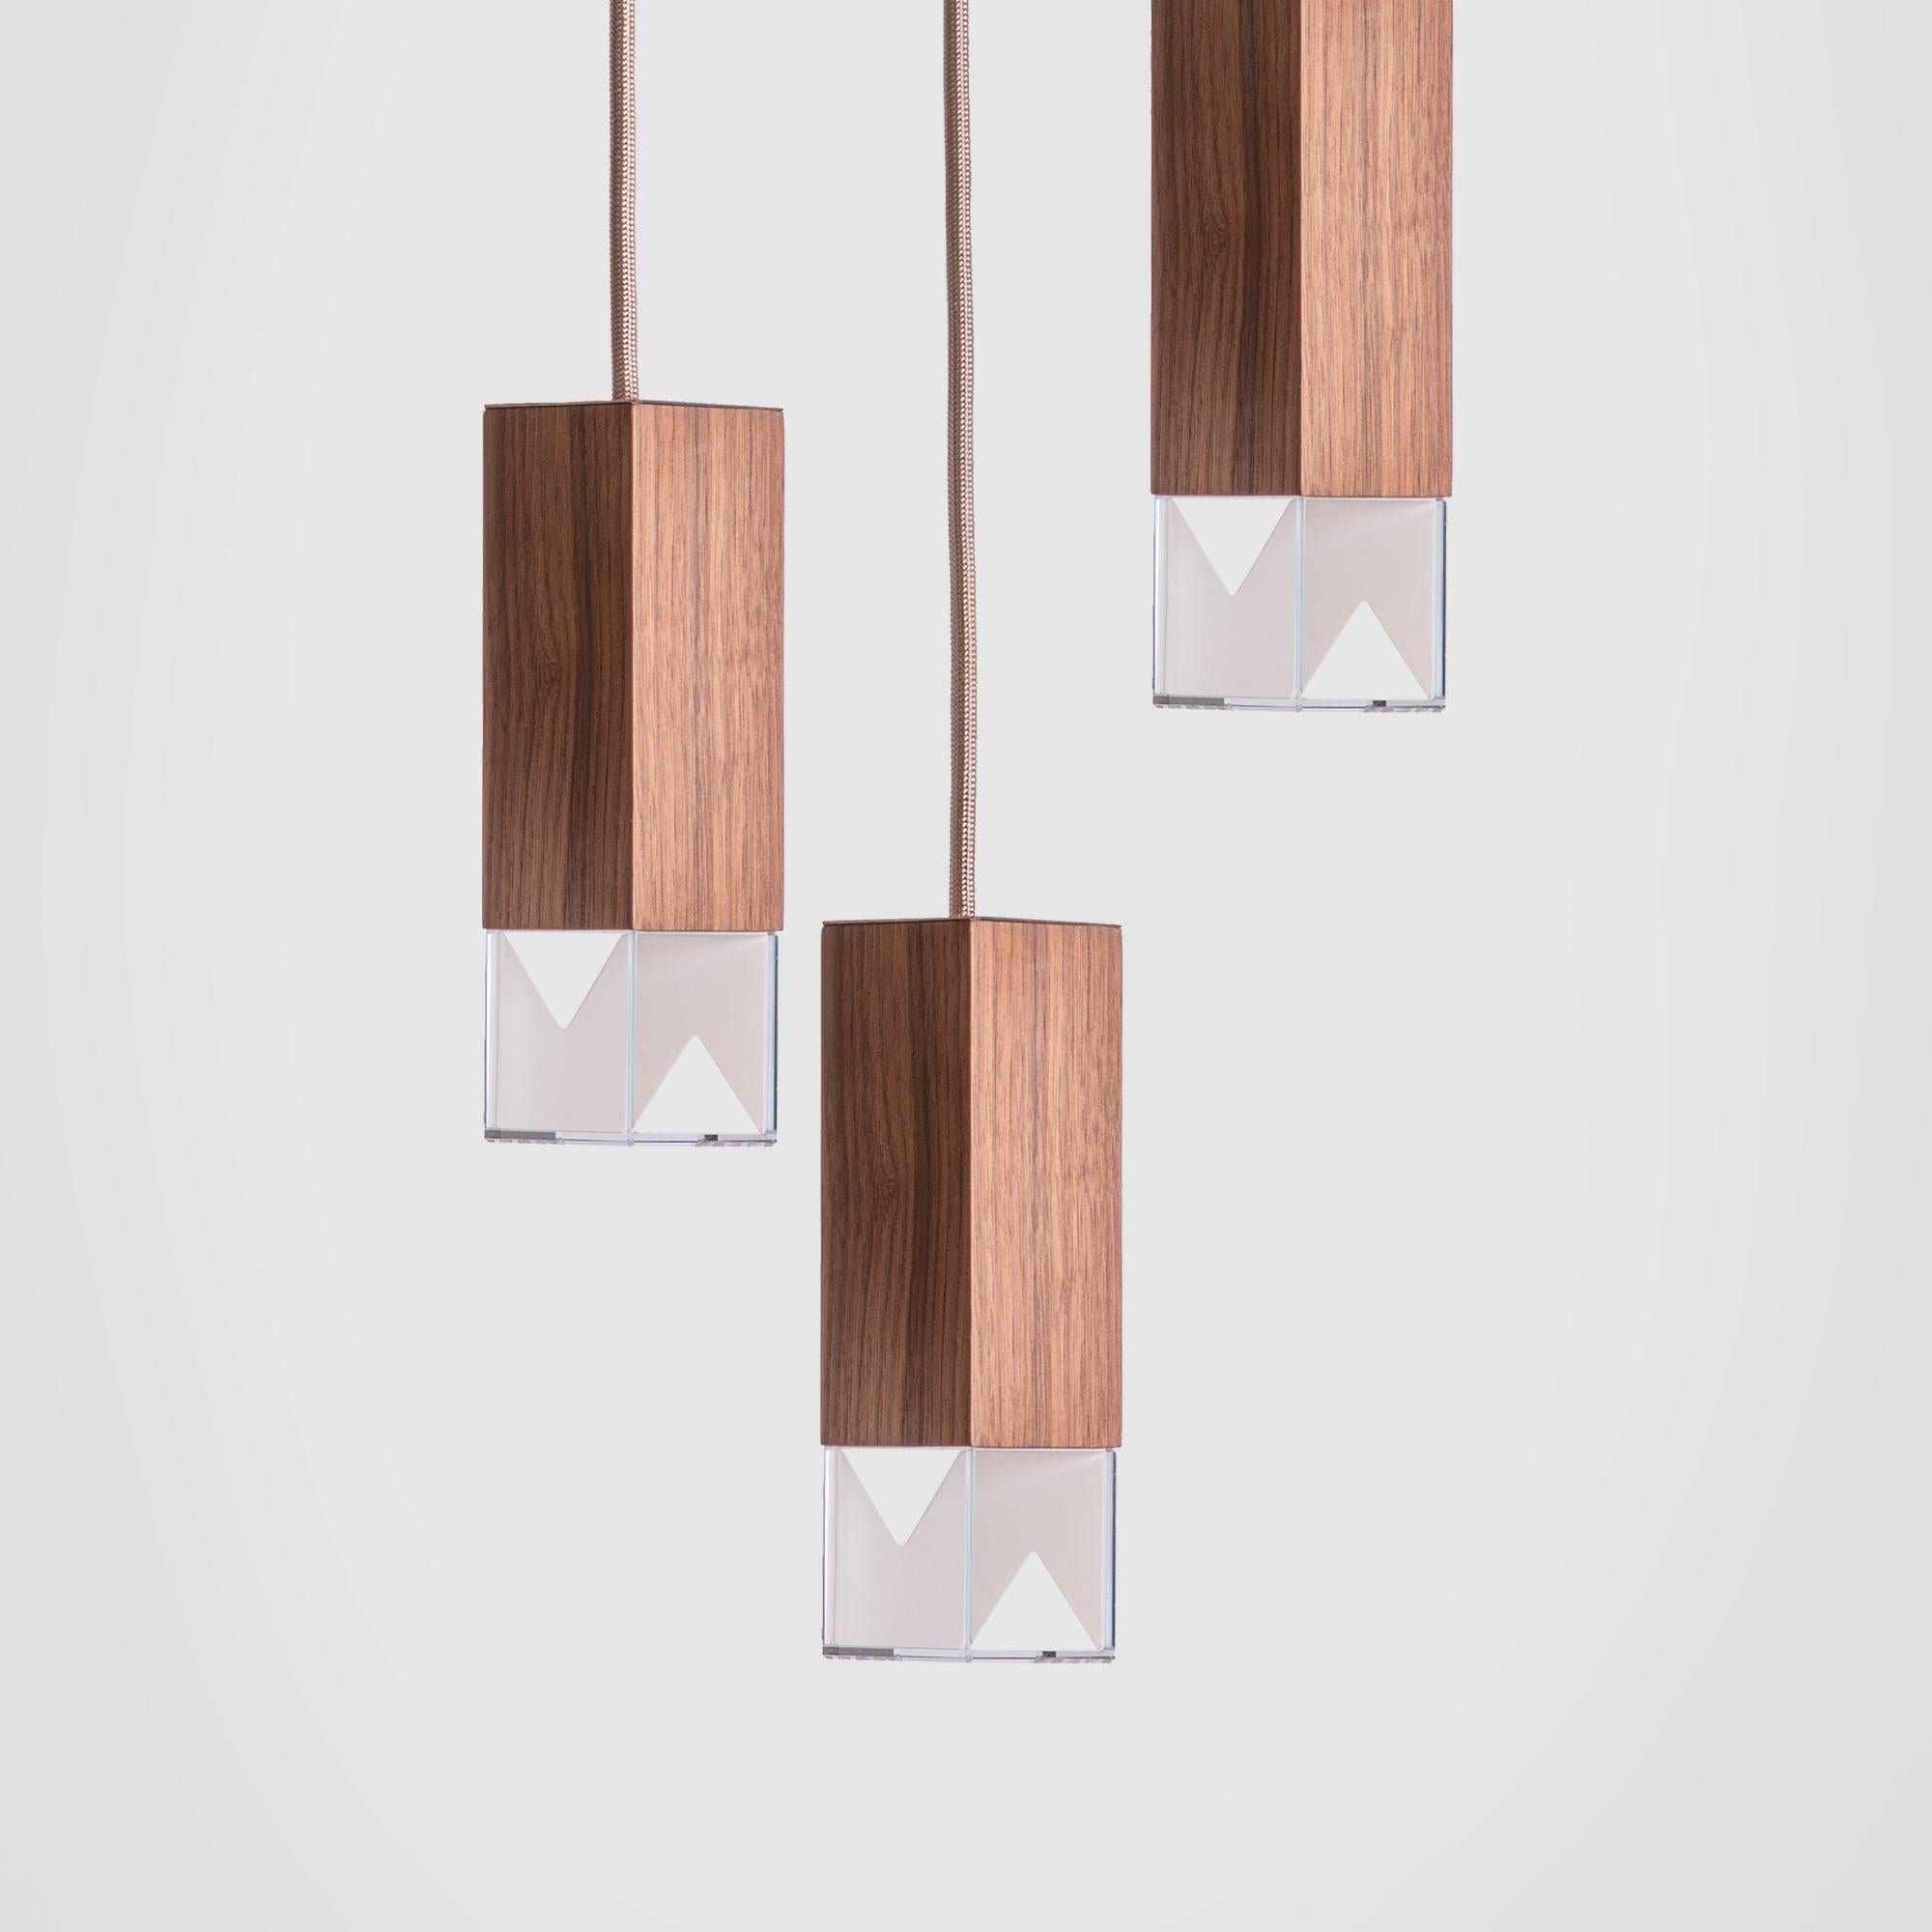 About
Contemporary Canaletto Walnut Wood Trio Chandelier by Formaminima

Lamp/One Wood Trio Chandelier from Chandeliers Series
Design by Formaminima
Chandelier
Materials:
Body lamp handcrafted in solid Canaletto walnut wood / crystal glass diffuser